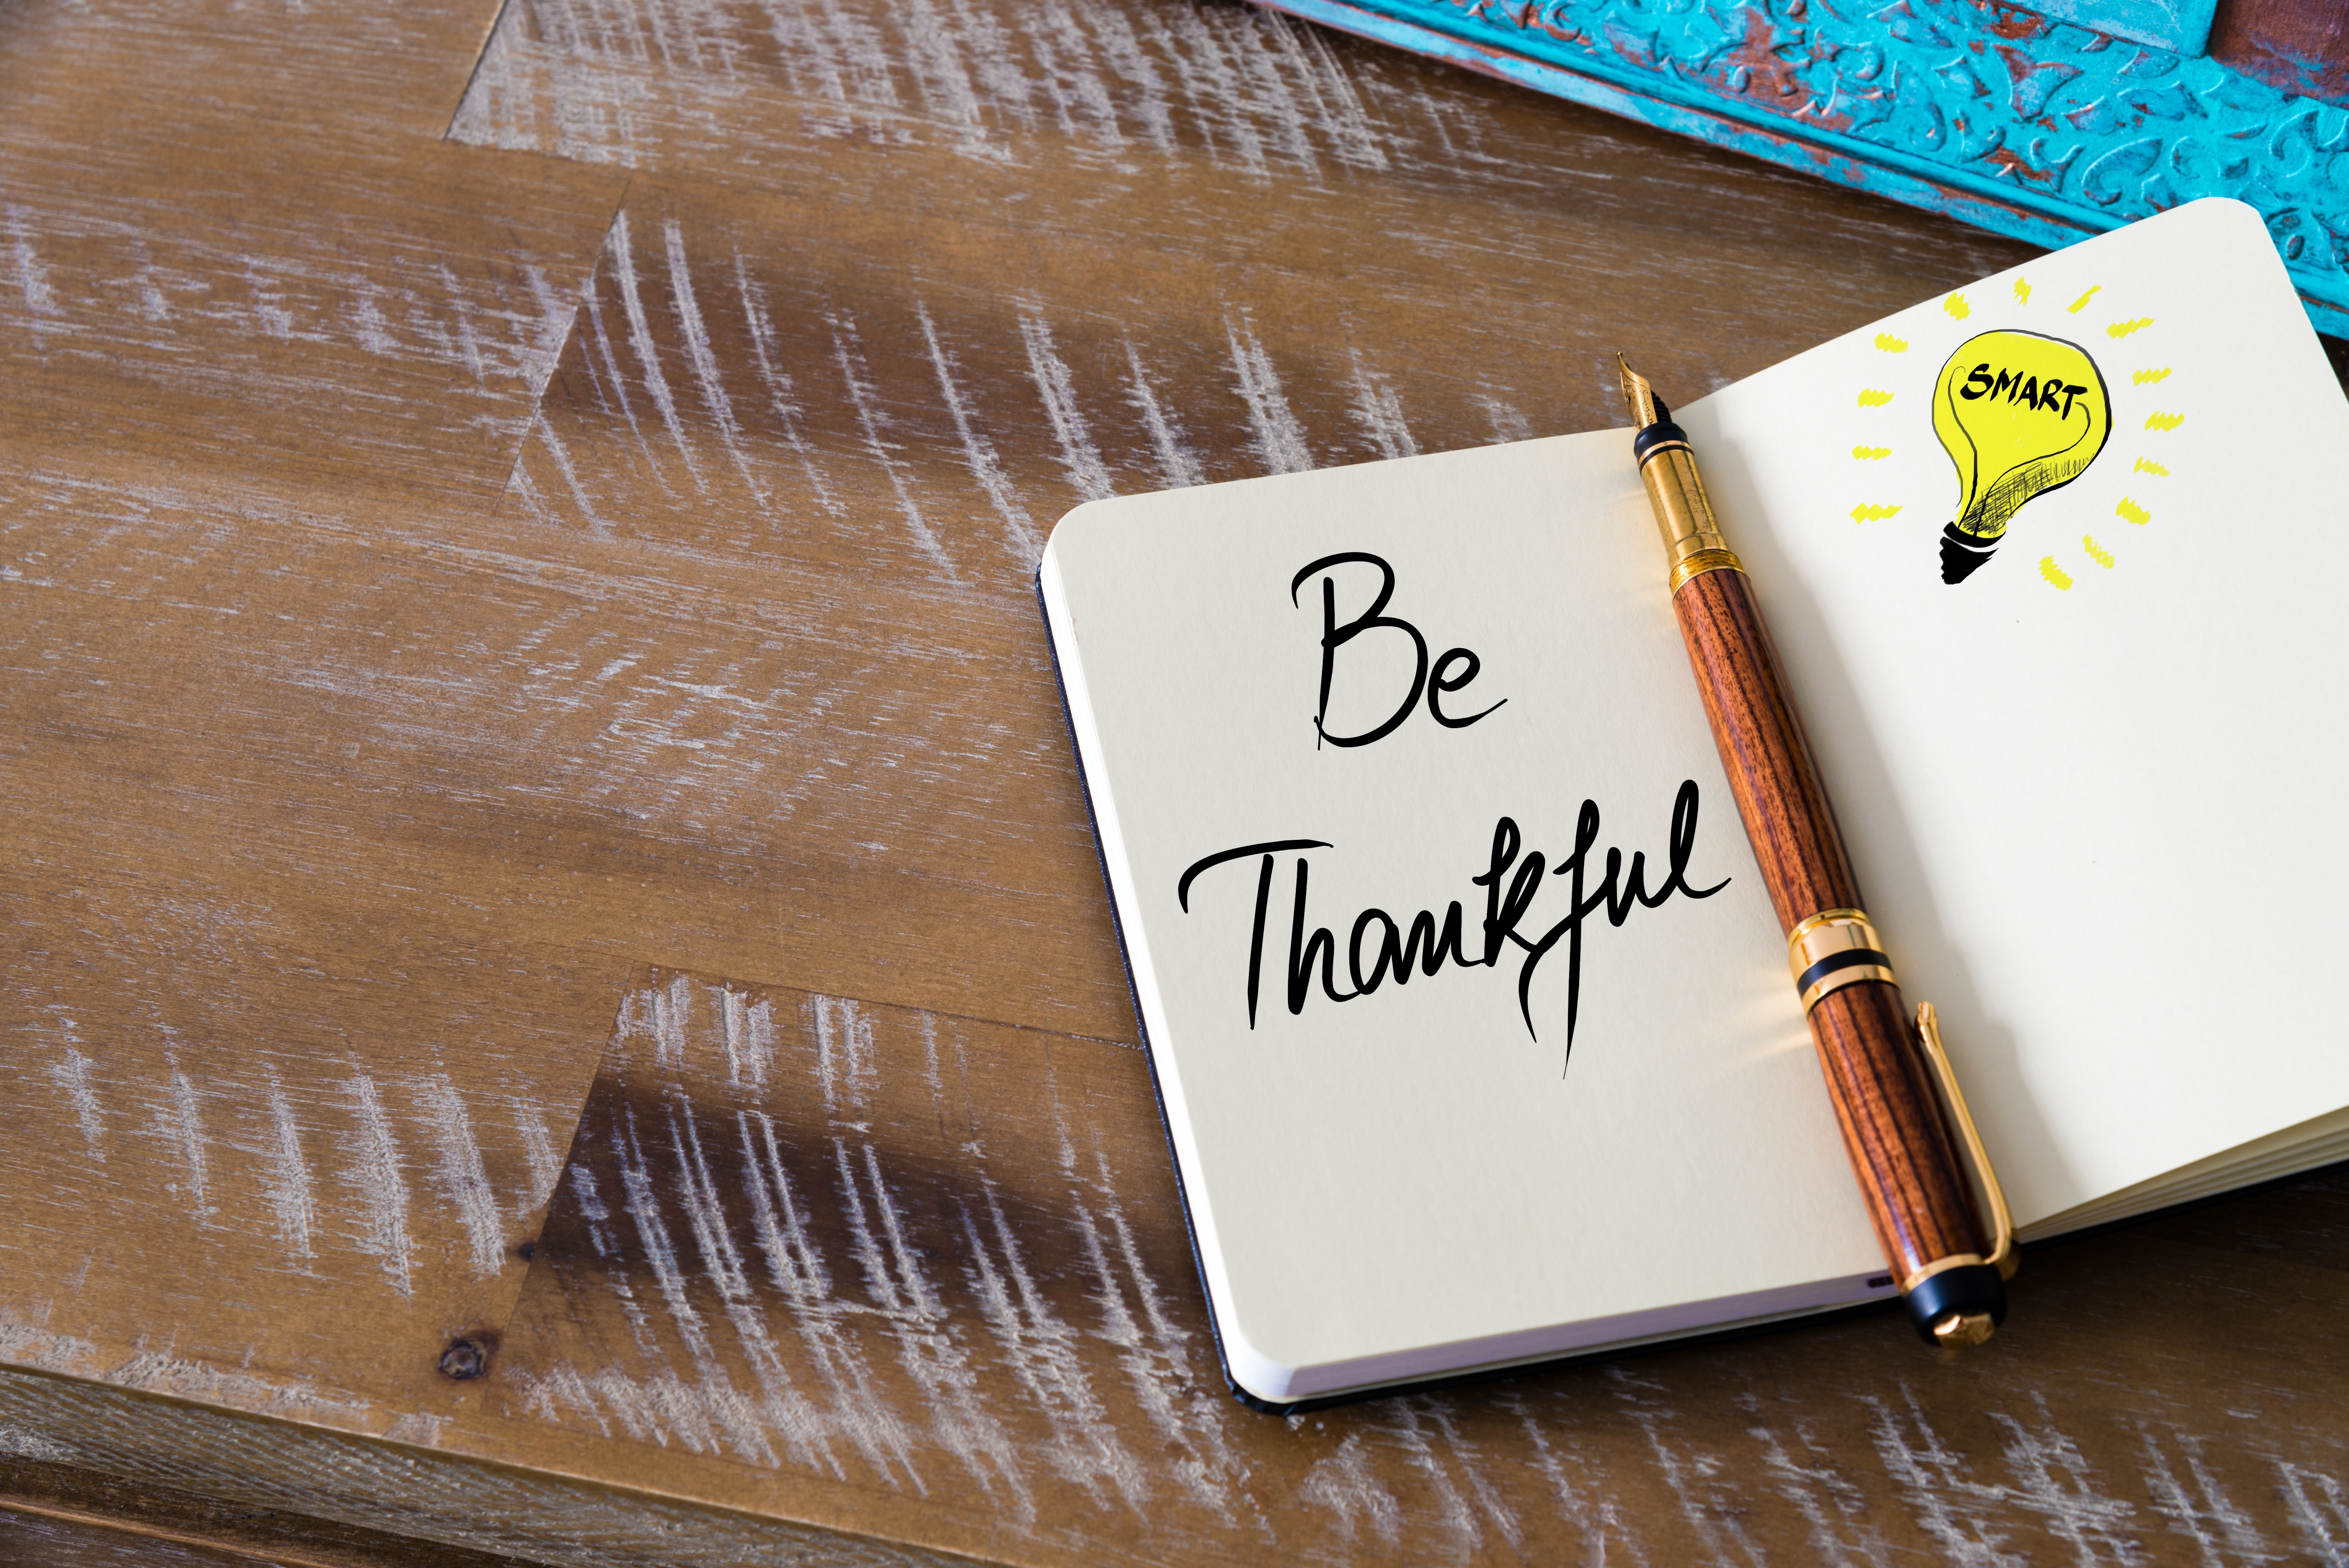 23 Quotes to Inspire an Attitude of Gratitude in Your Sales Approach